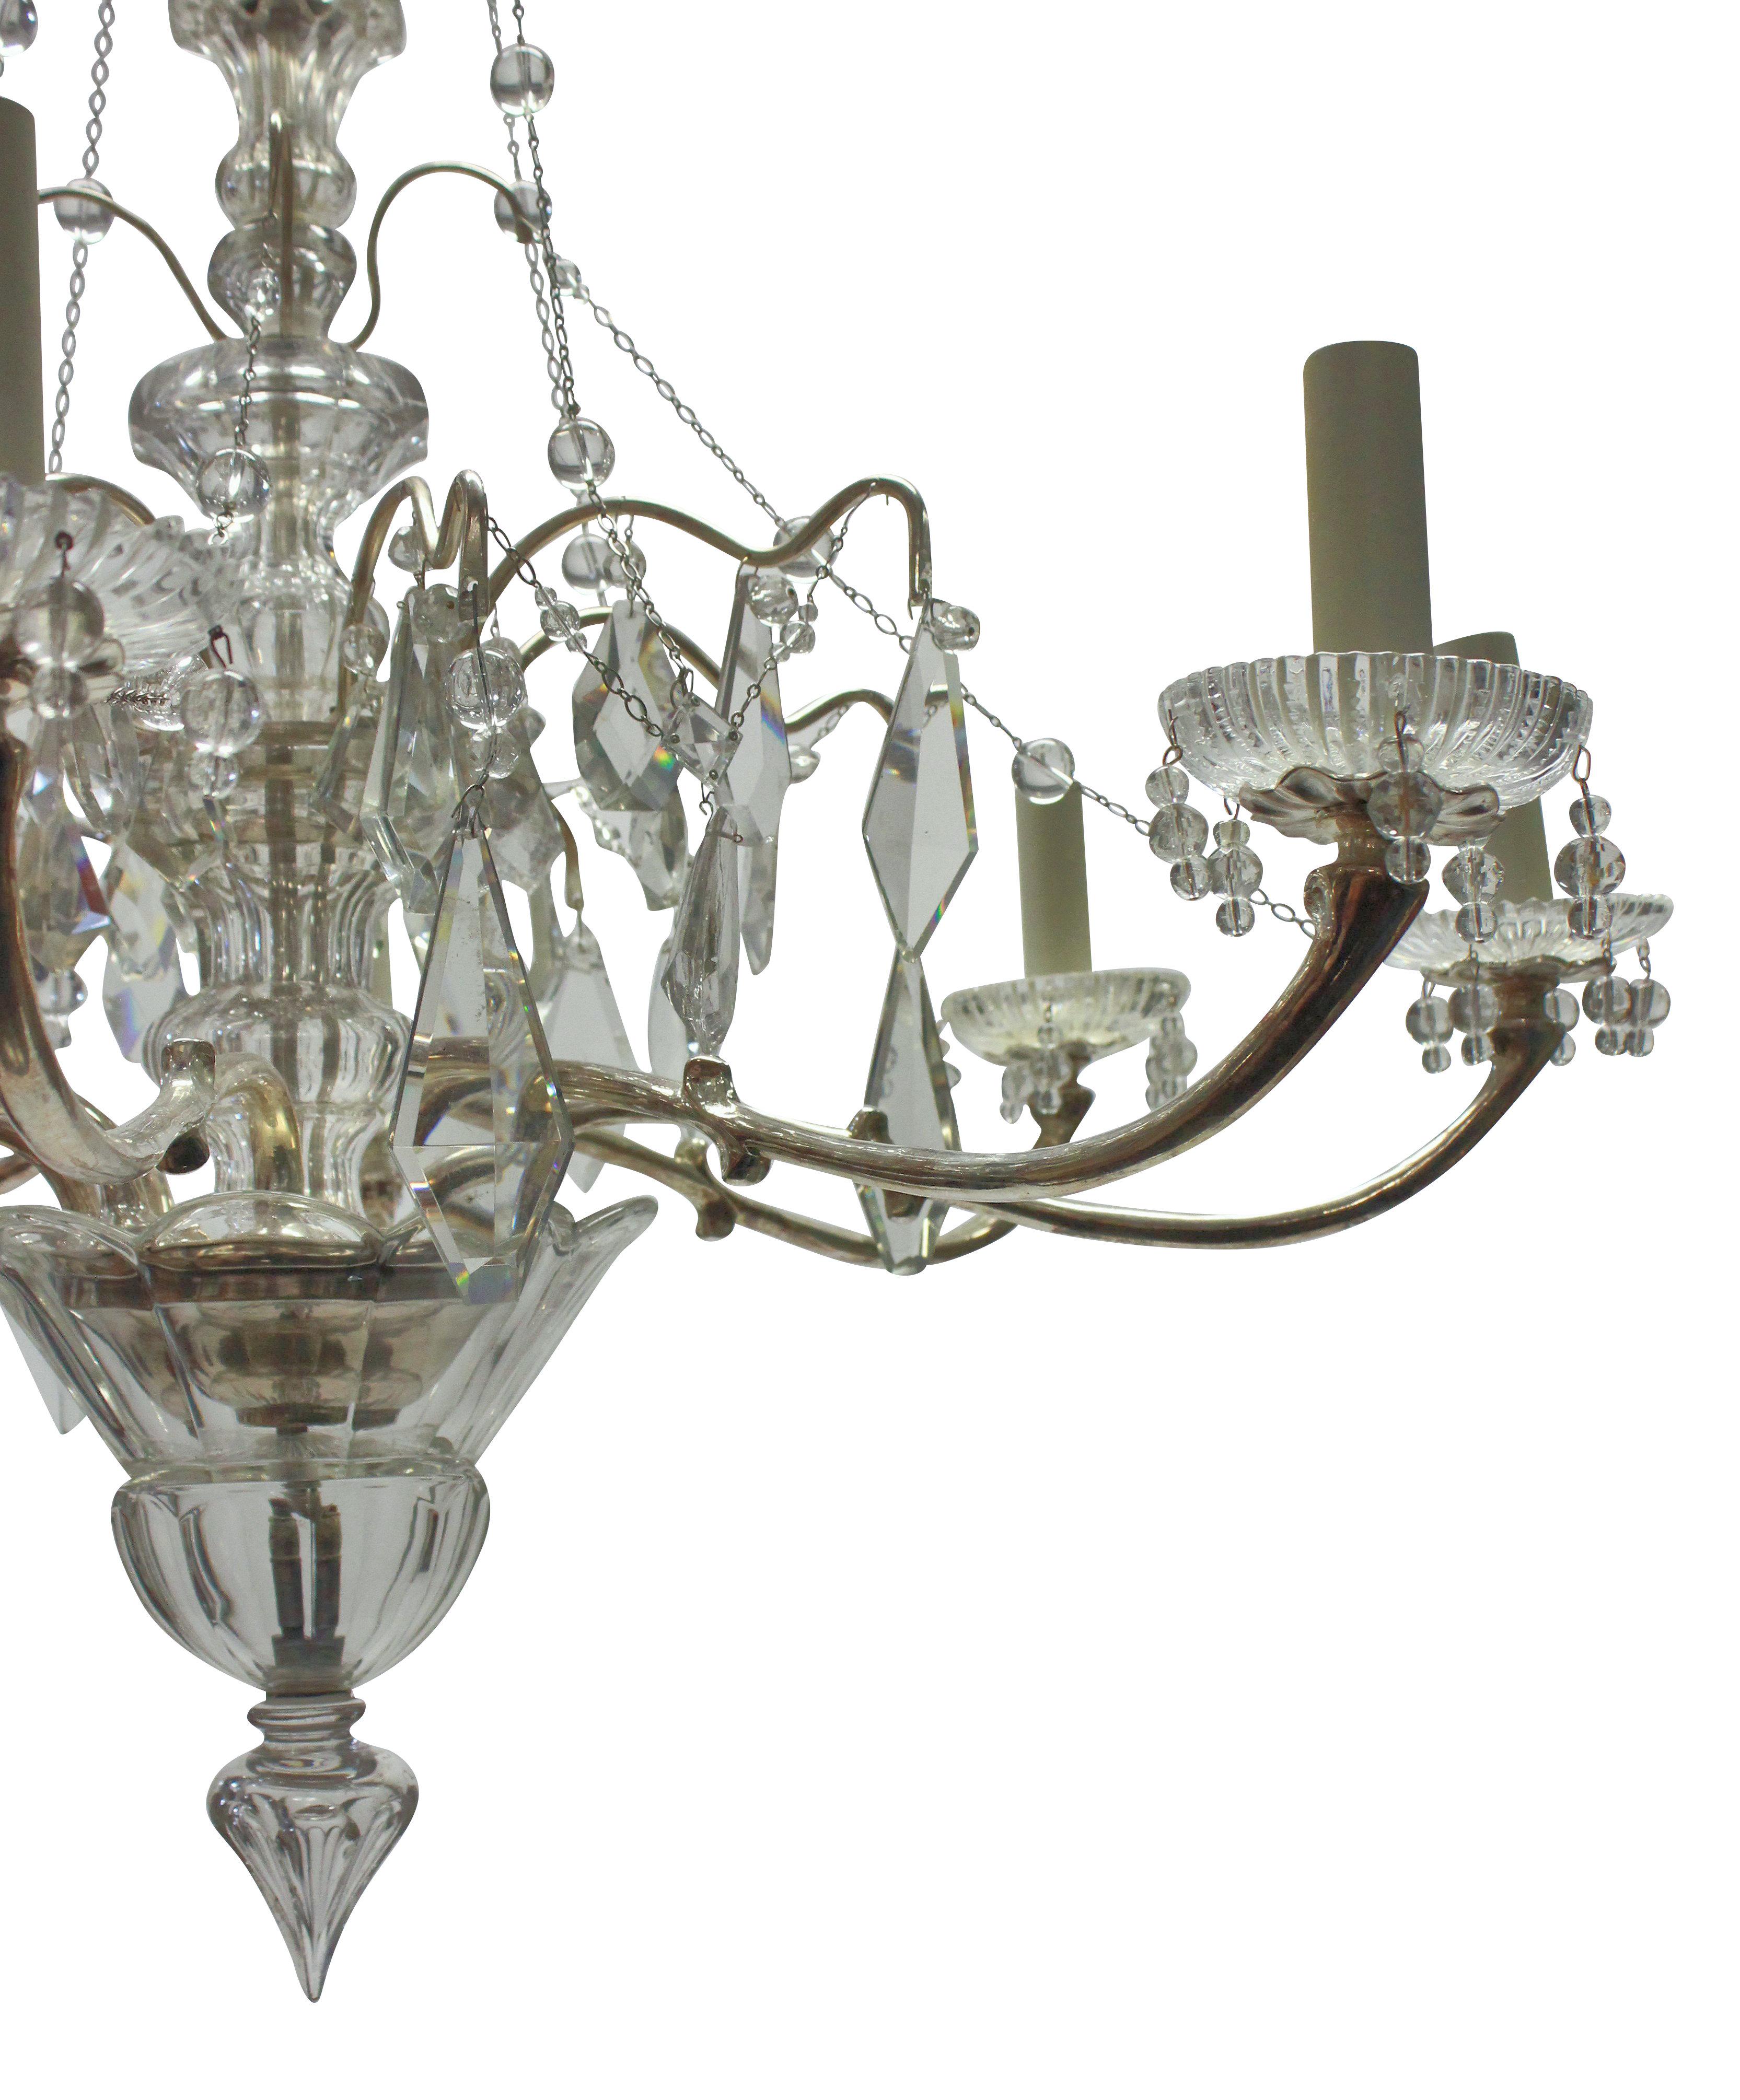 A decorative French silver plated and cut glass chandelier of six arms. Hung throughout with finely cut plaques, chains & beads, with a crisply cut central baluster stem and finial.